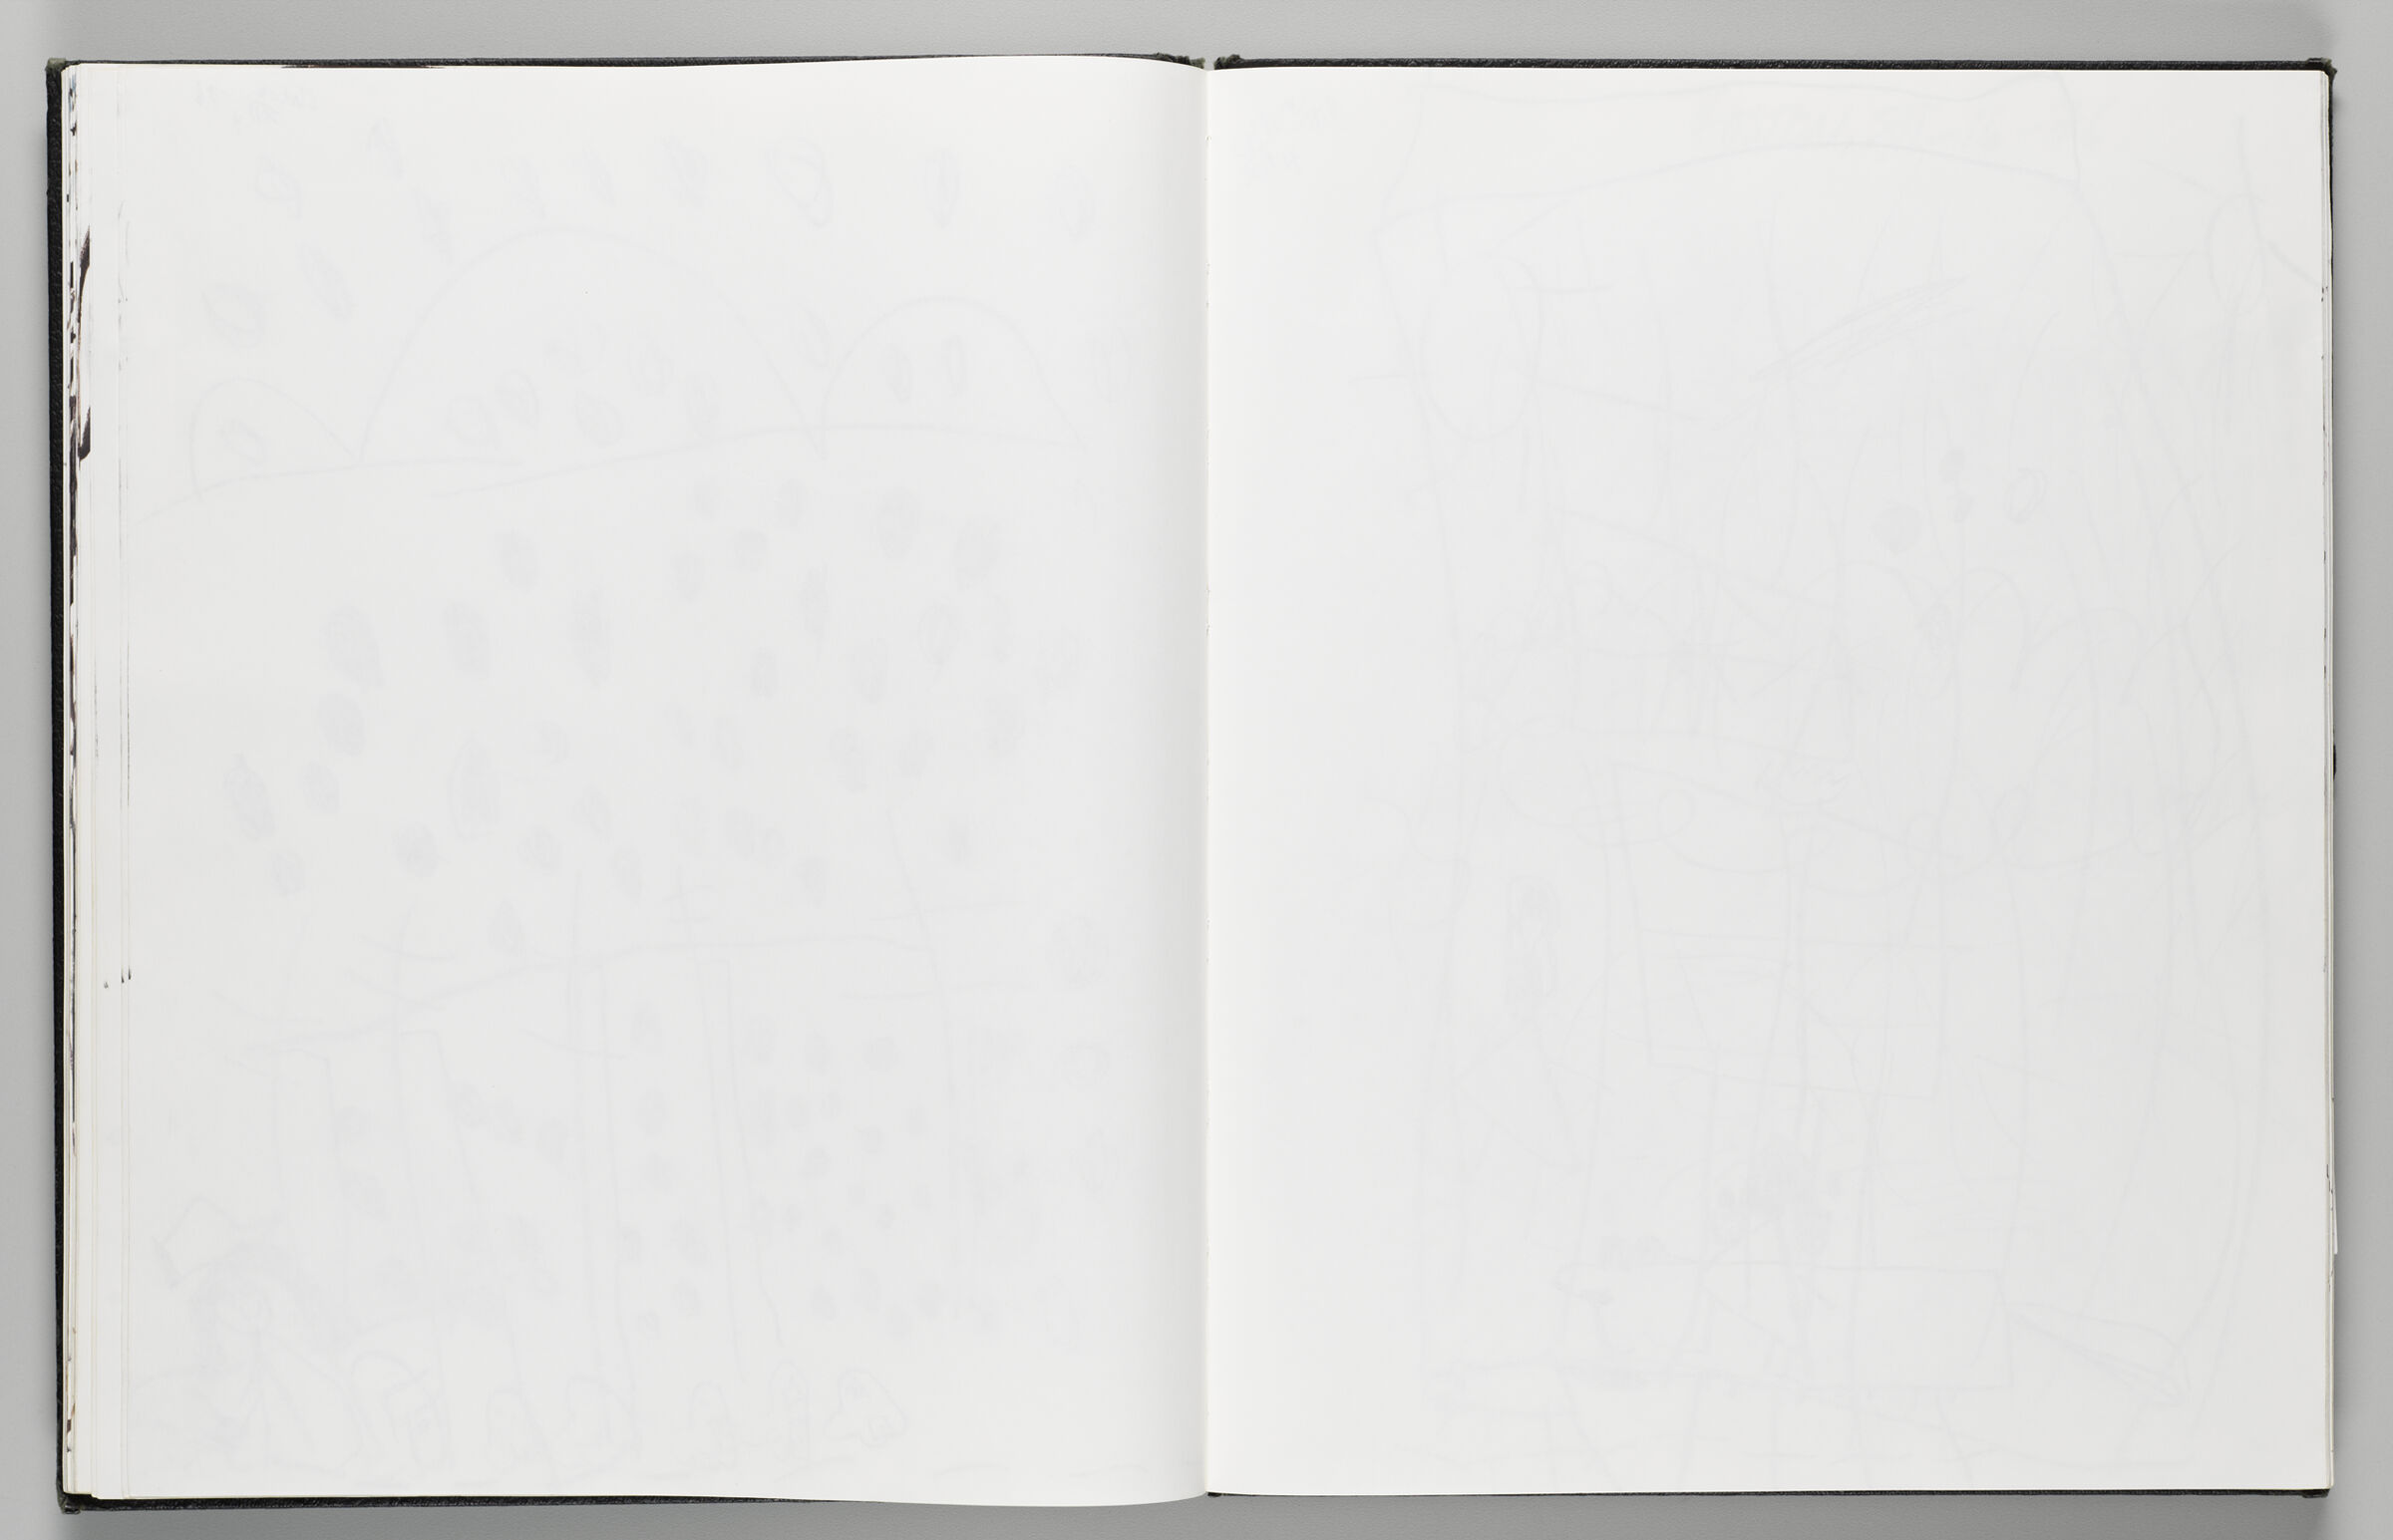 Untitled (Blank, Left Page) ; Untitled (Blank, Right Page)